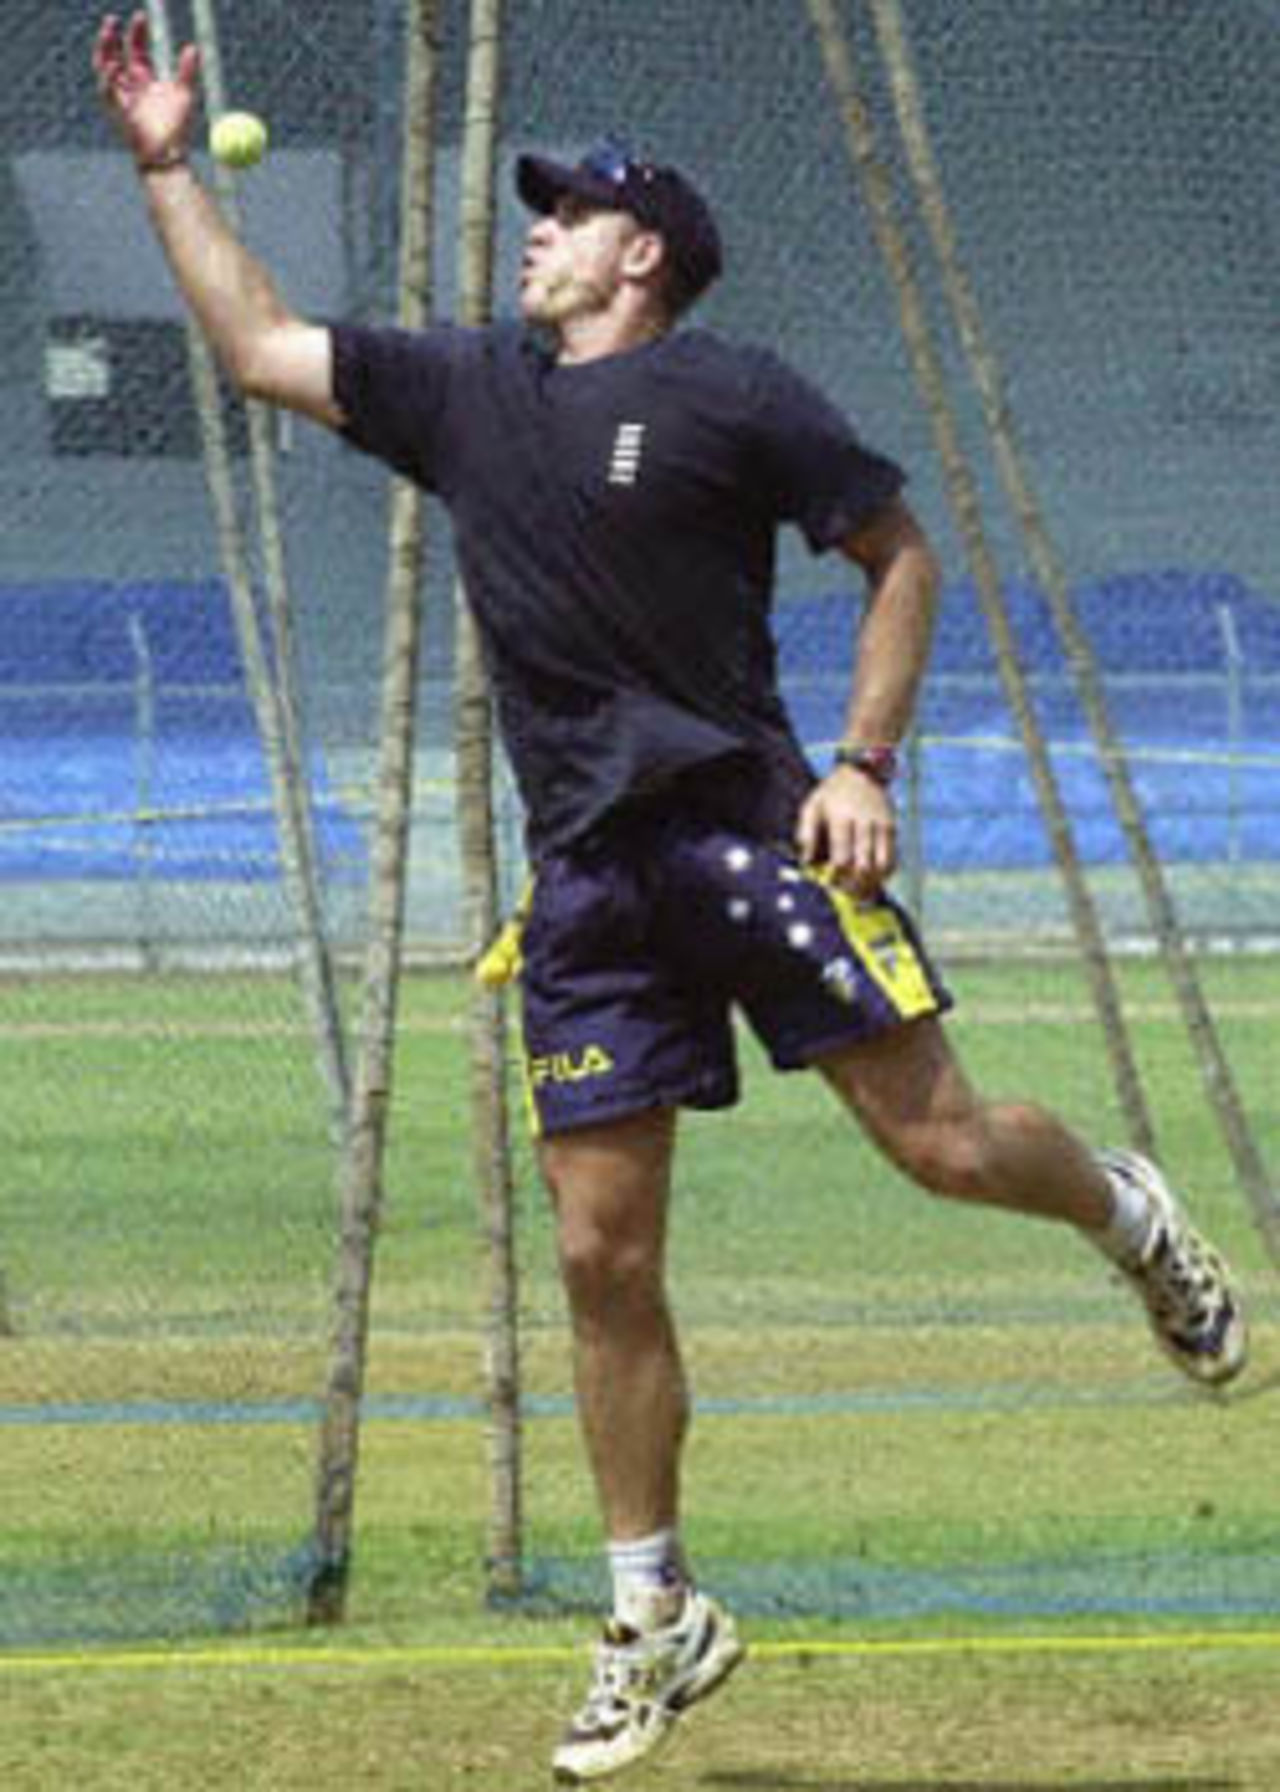 Australian cricketer Mathew Hayden leaps for a catch during practice at the nets, 21 February 2001, at the Brabourne stadium in Bombay. Australia will play the Bombay Champions in a three day warm-up match on February 22.